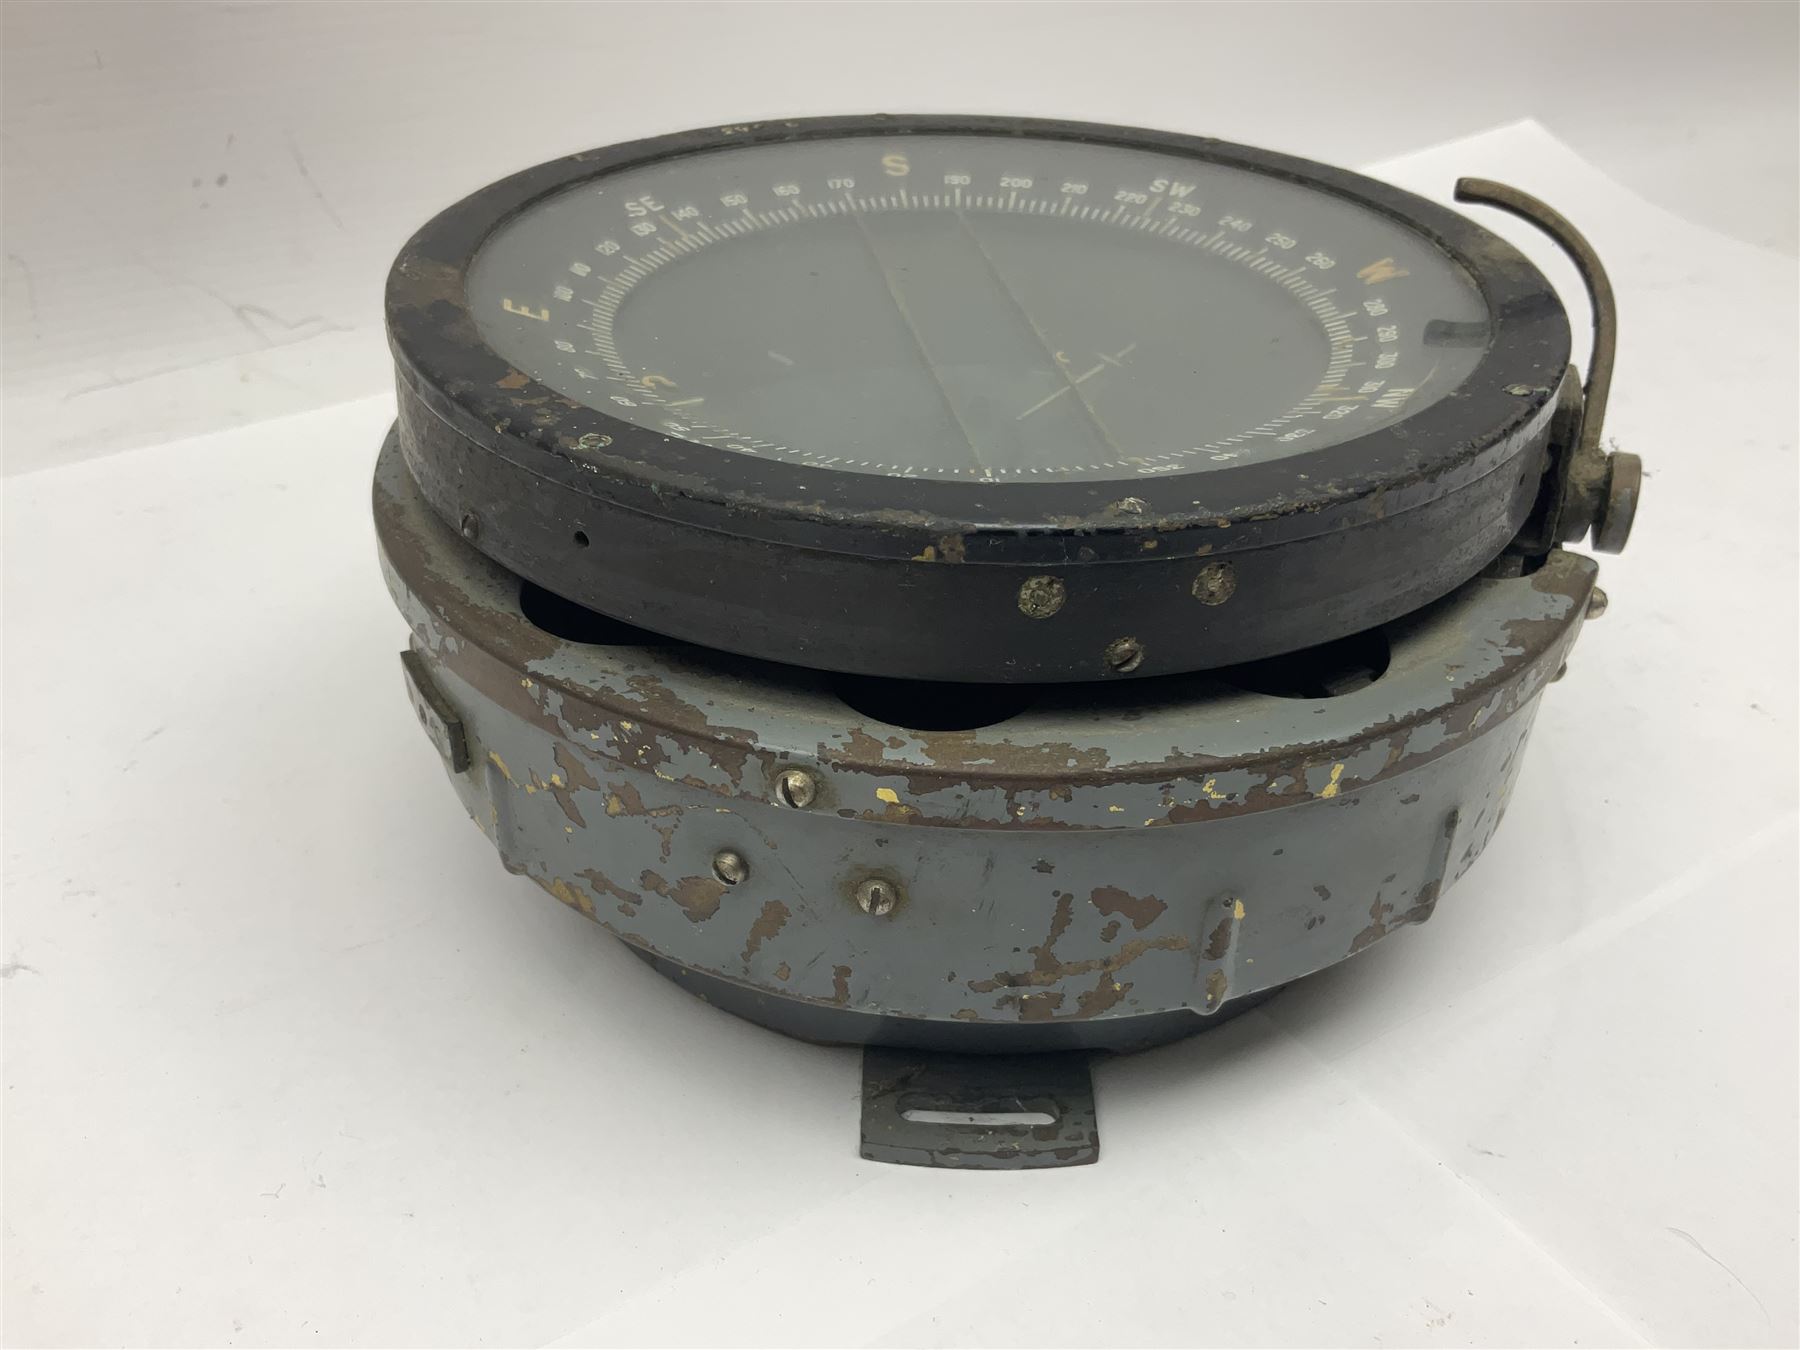 Air Ministry type P8 Compass - Image 10 of 11